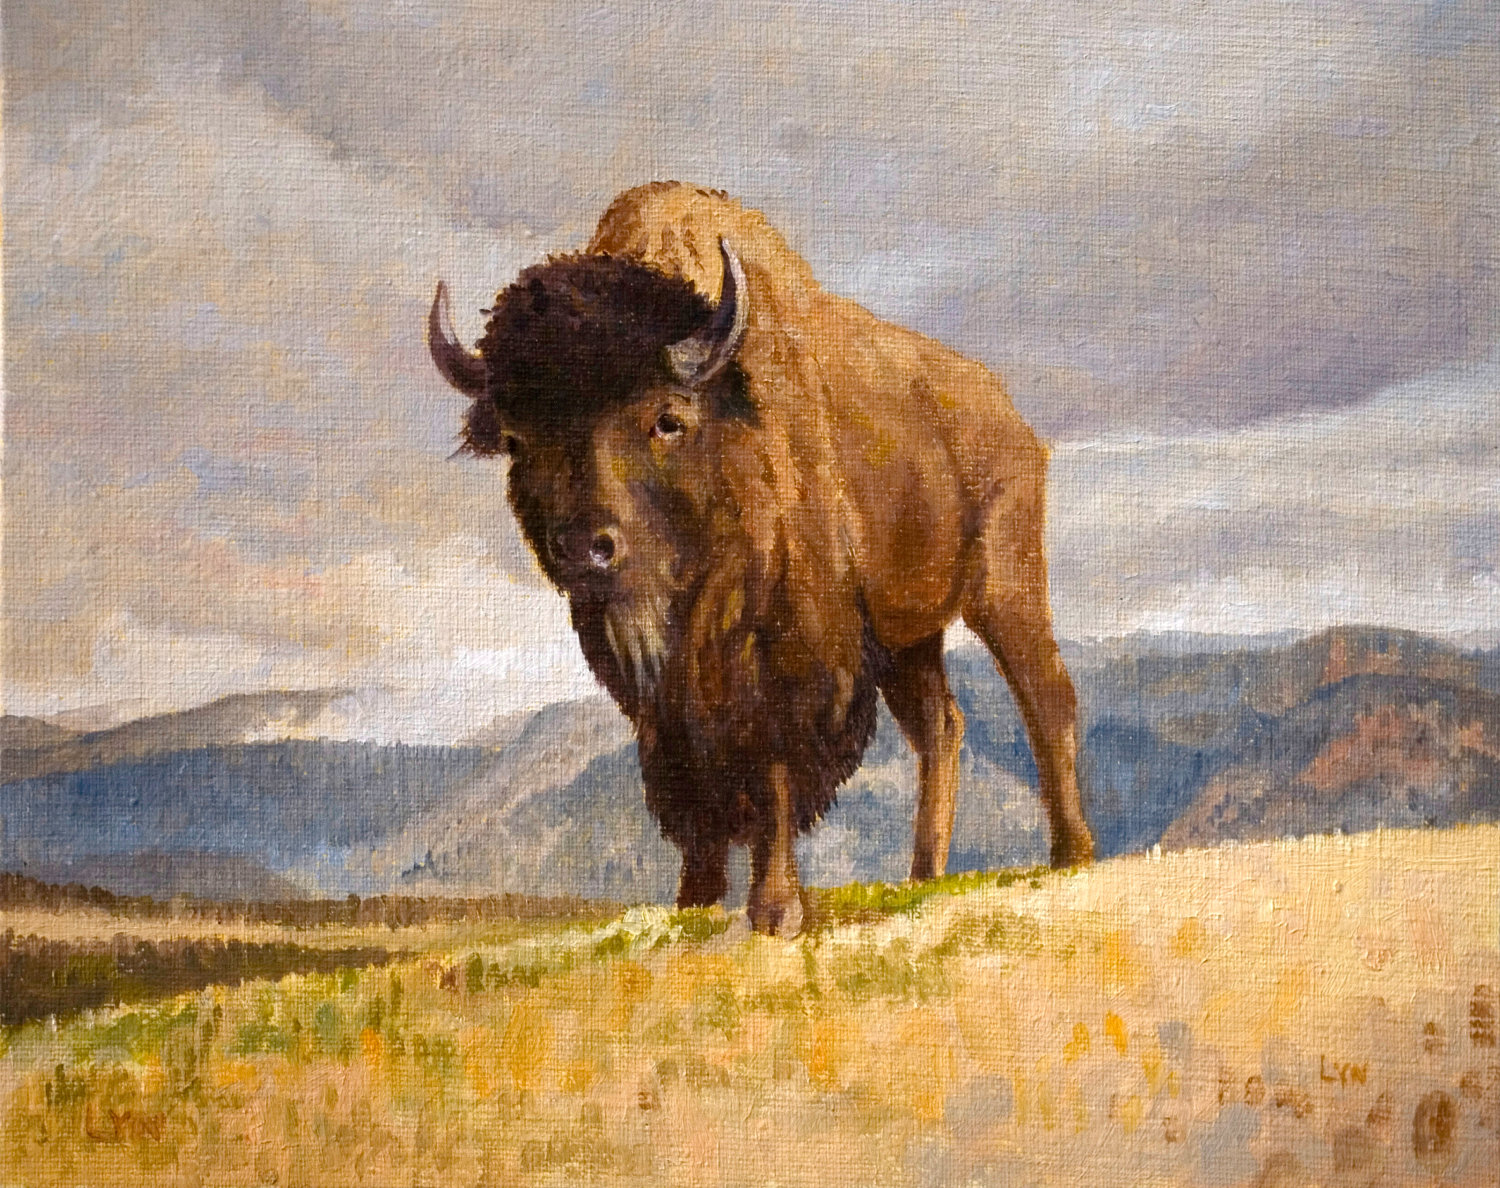 American Bison Buffalo Animal HD Wallpaper Pictures